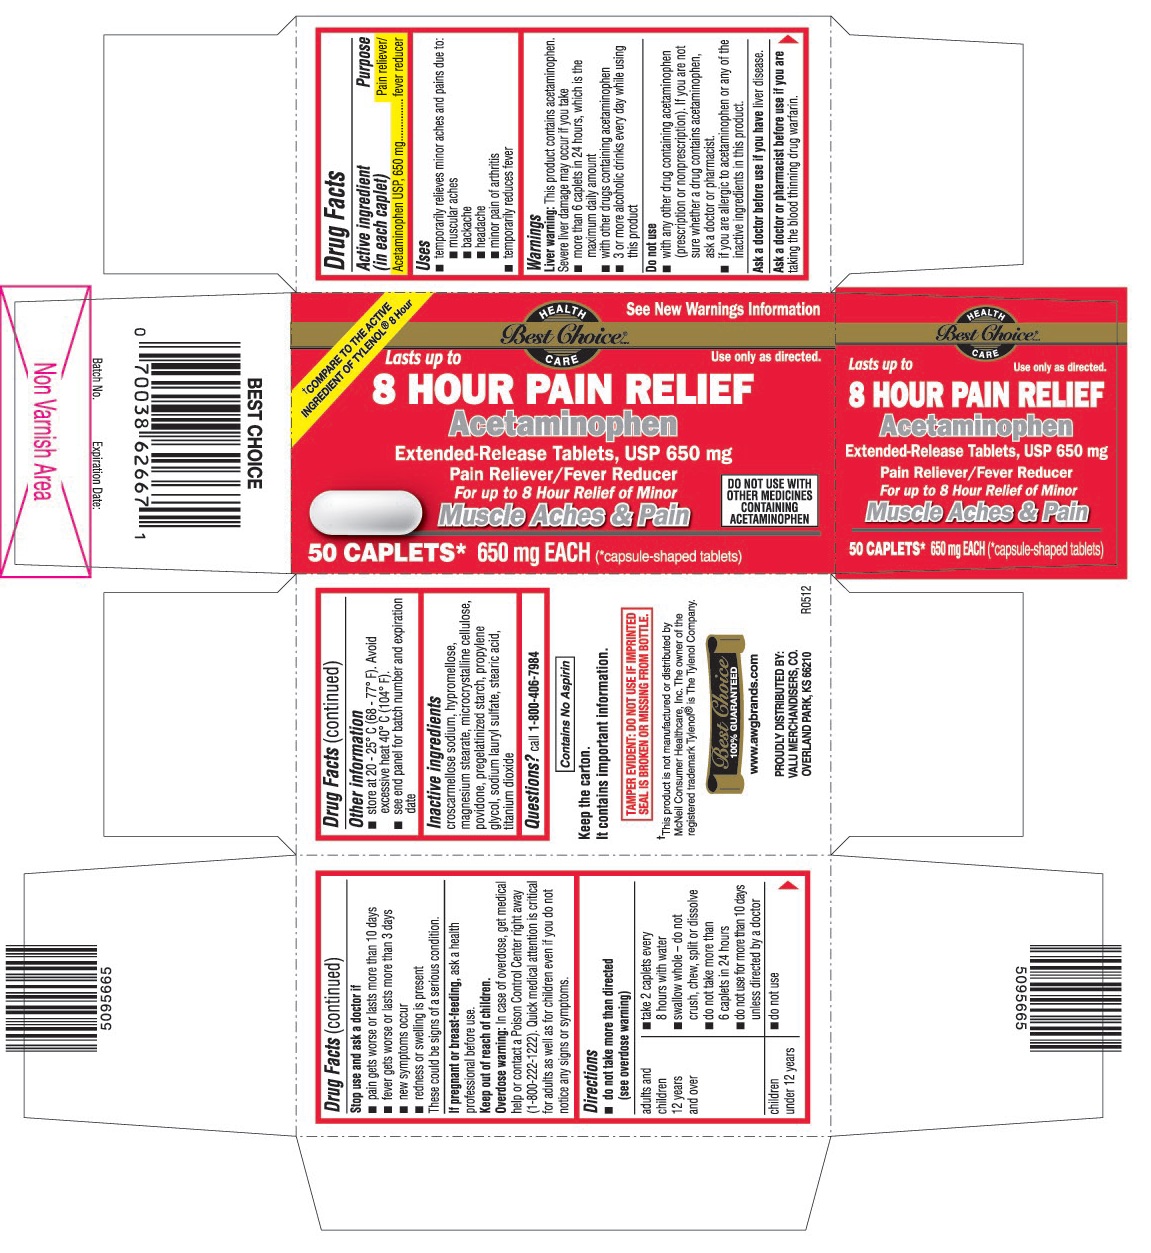 This is the 50 count bottle carton label for Best Choice Acetaminophen extended-release tablets, USP 650 mg.